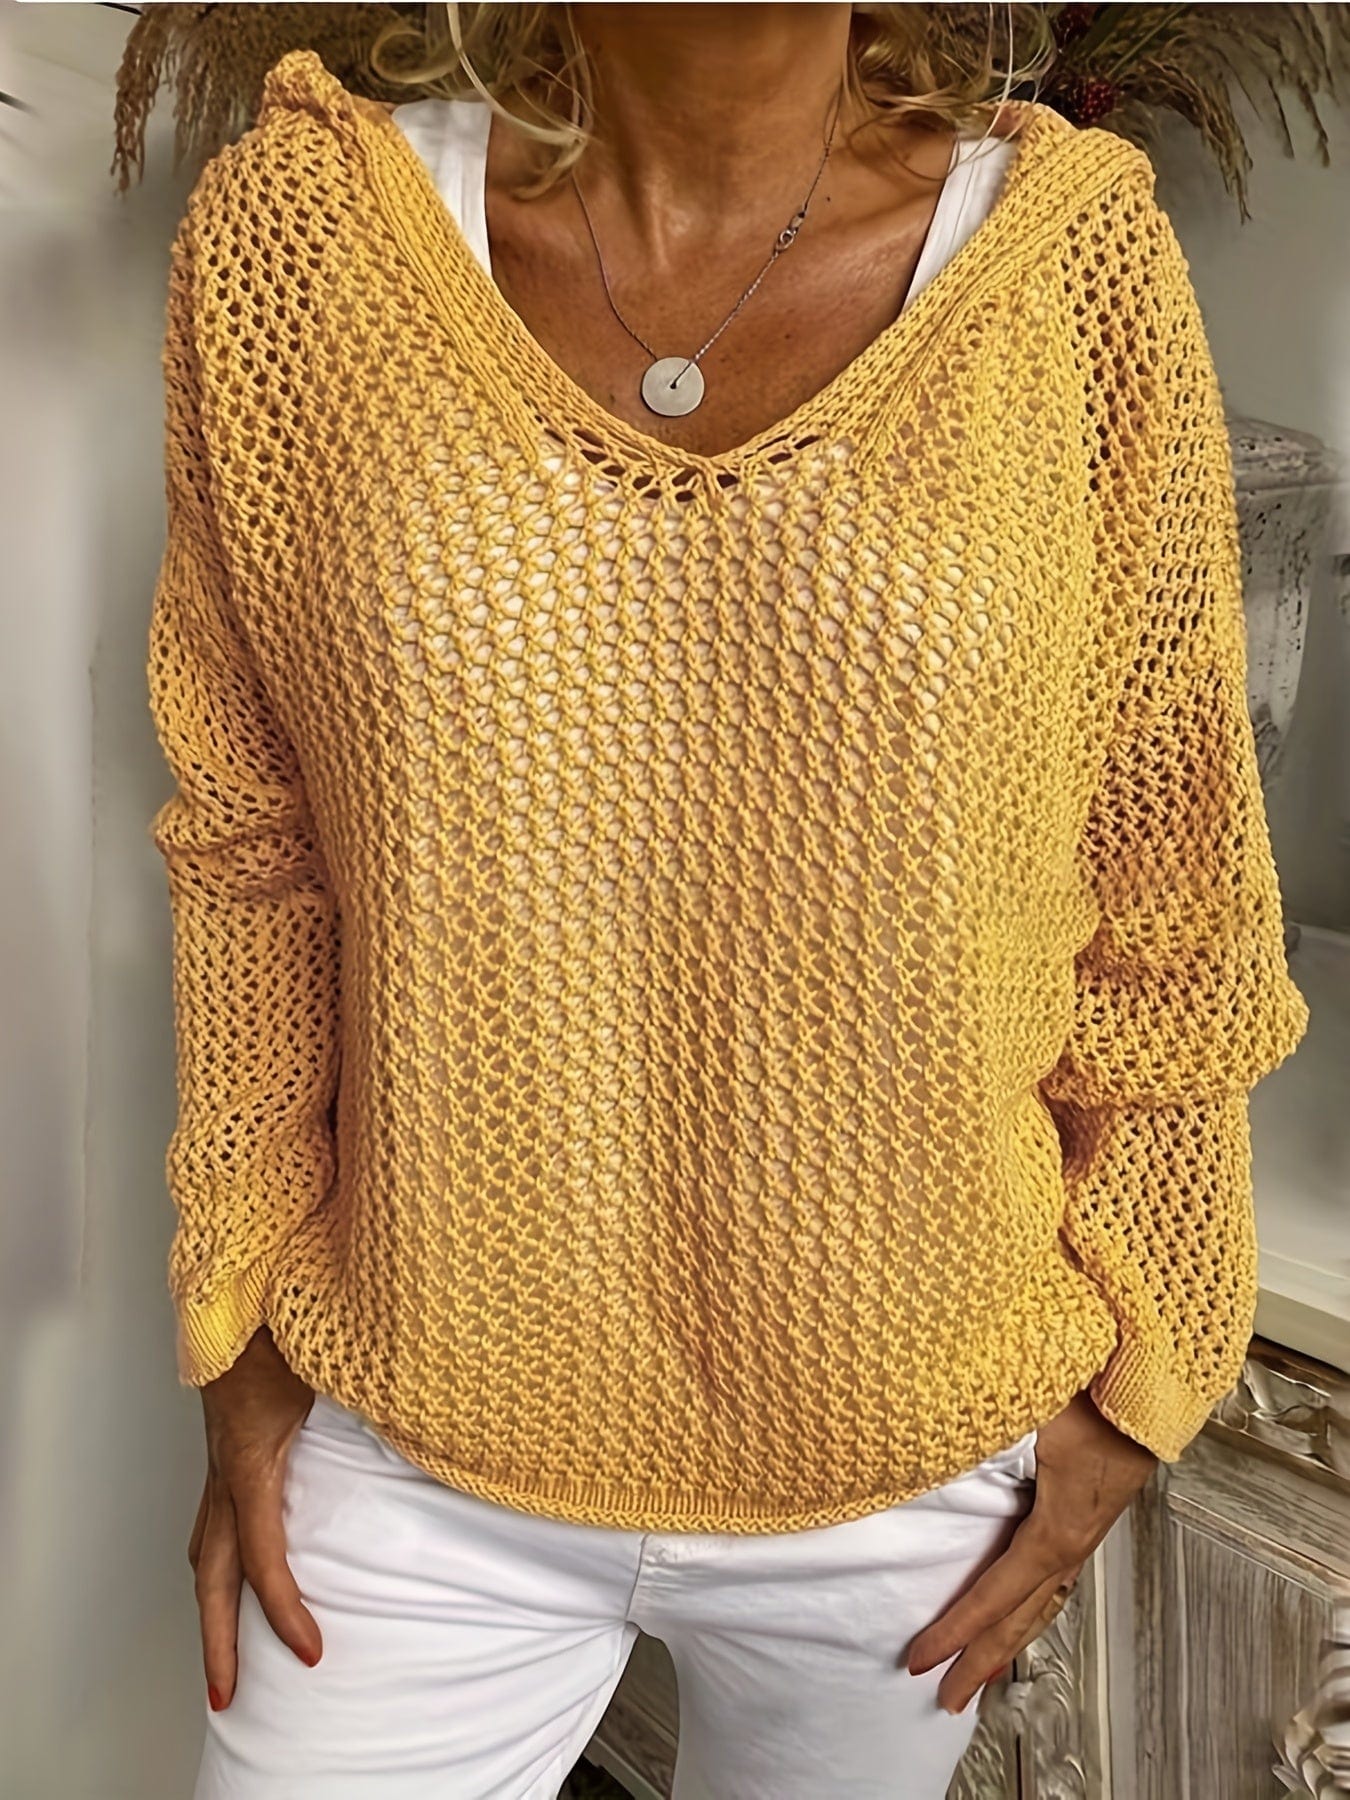 Plus Size Casual Sweater, Women's Plus Solid Long Sleeve Slight Stretch Hooded Sweater PLU2309A2806YEL1XL(14) Yellow / 1XL(14)